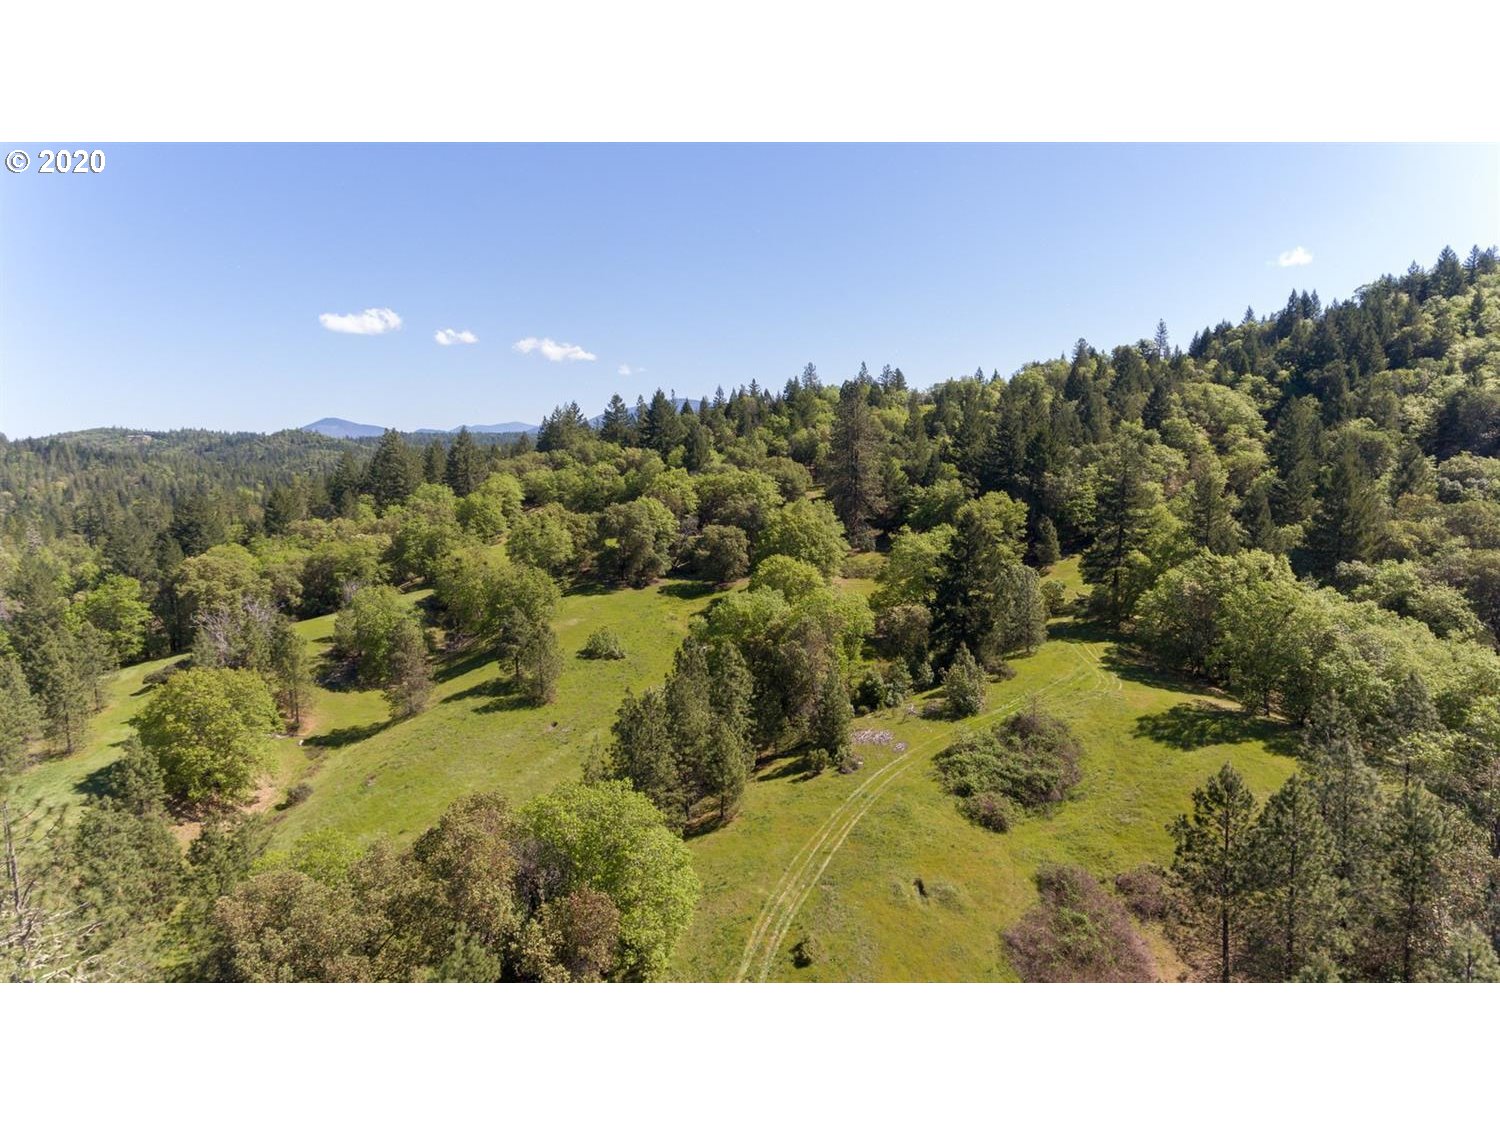 0 LOWER RIVER RD Grants Pass, OR MLS# 20254644 | 97526 | Home for Sale